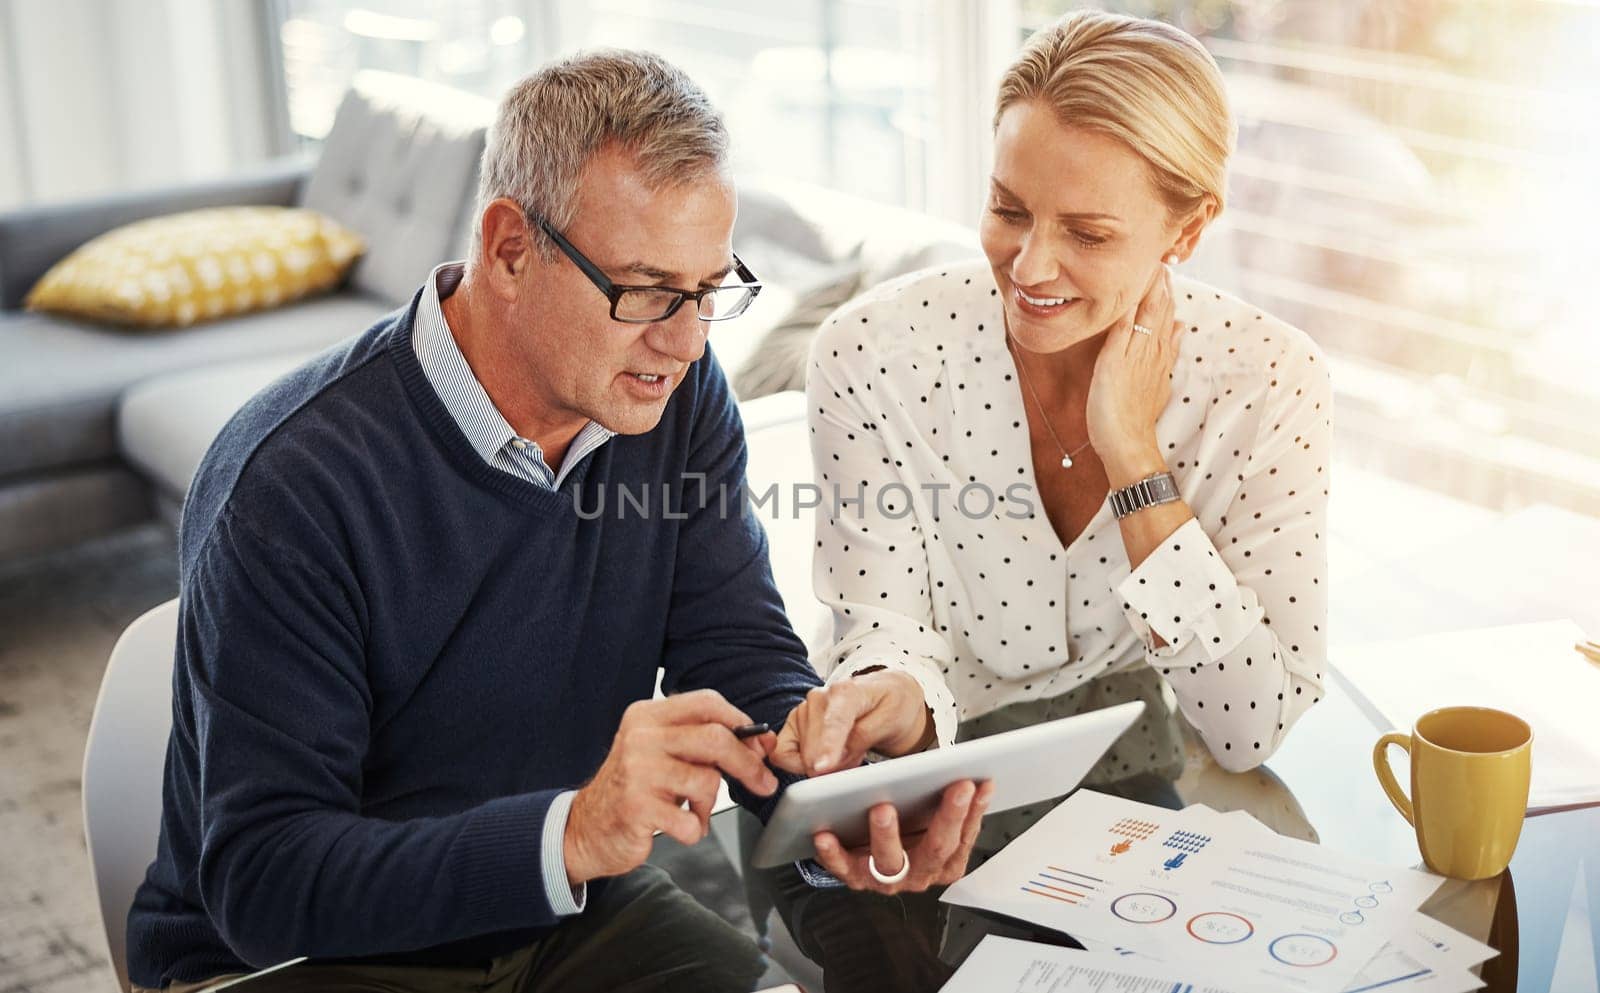 Digital technology is their monthly budget manager. a mature couple using a digital tablet while going through paperwork at home